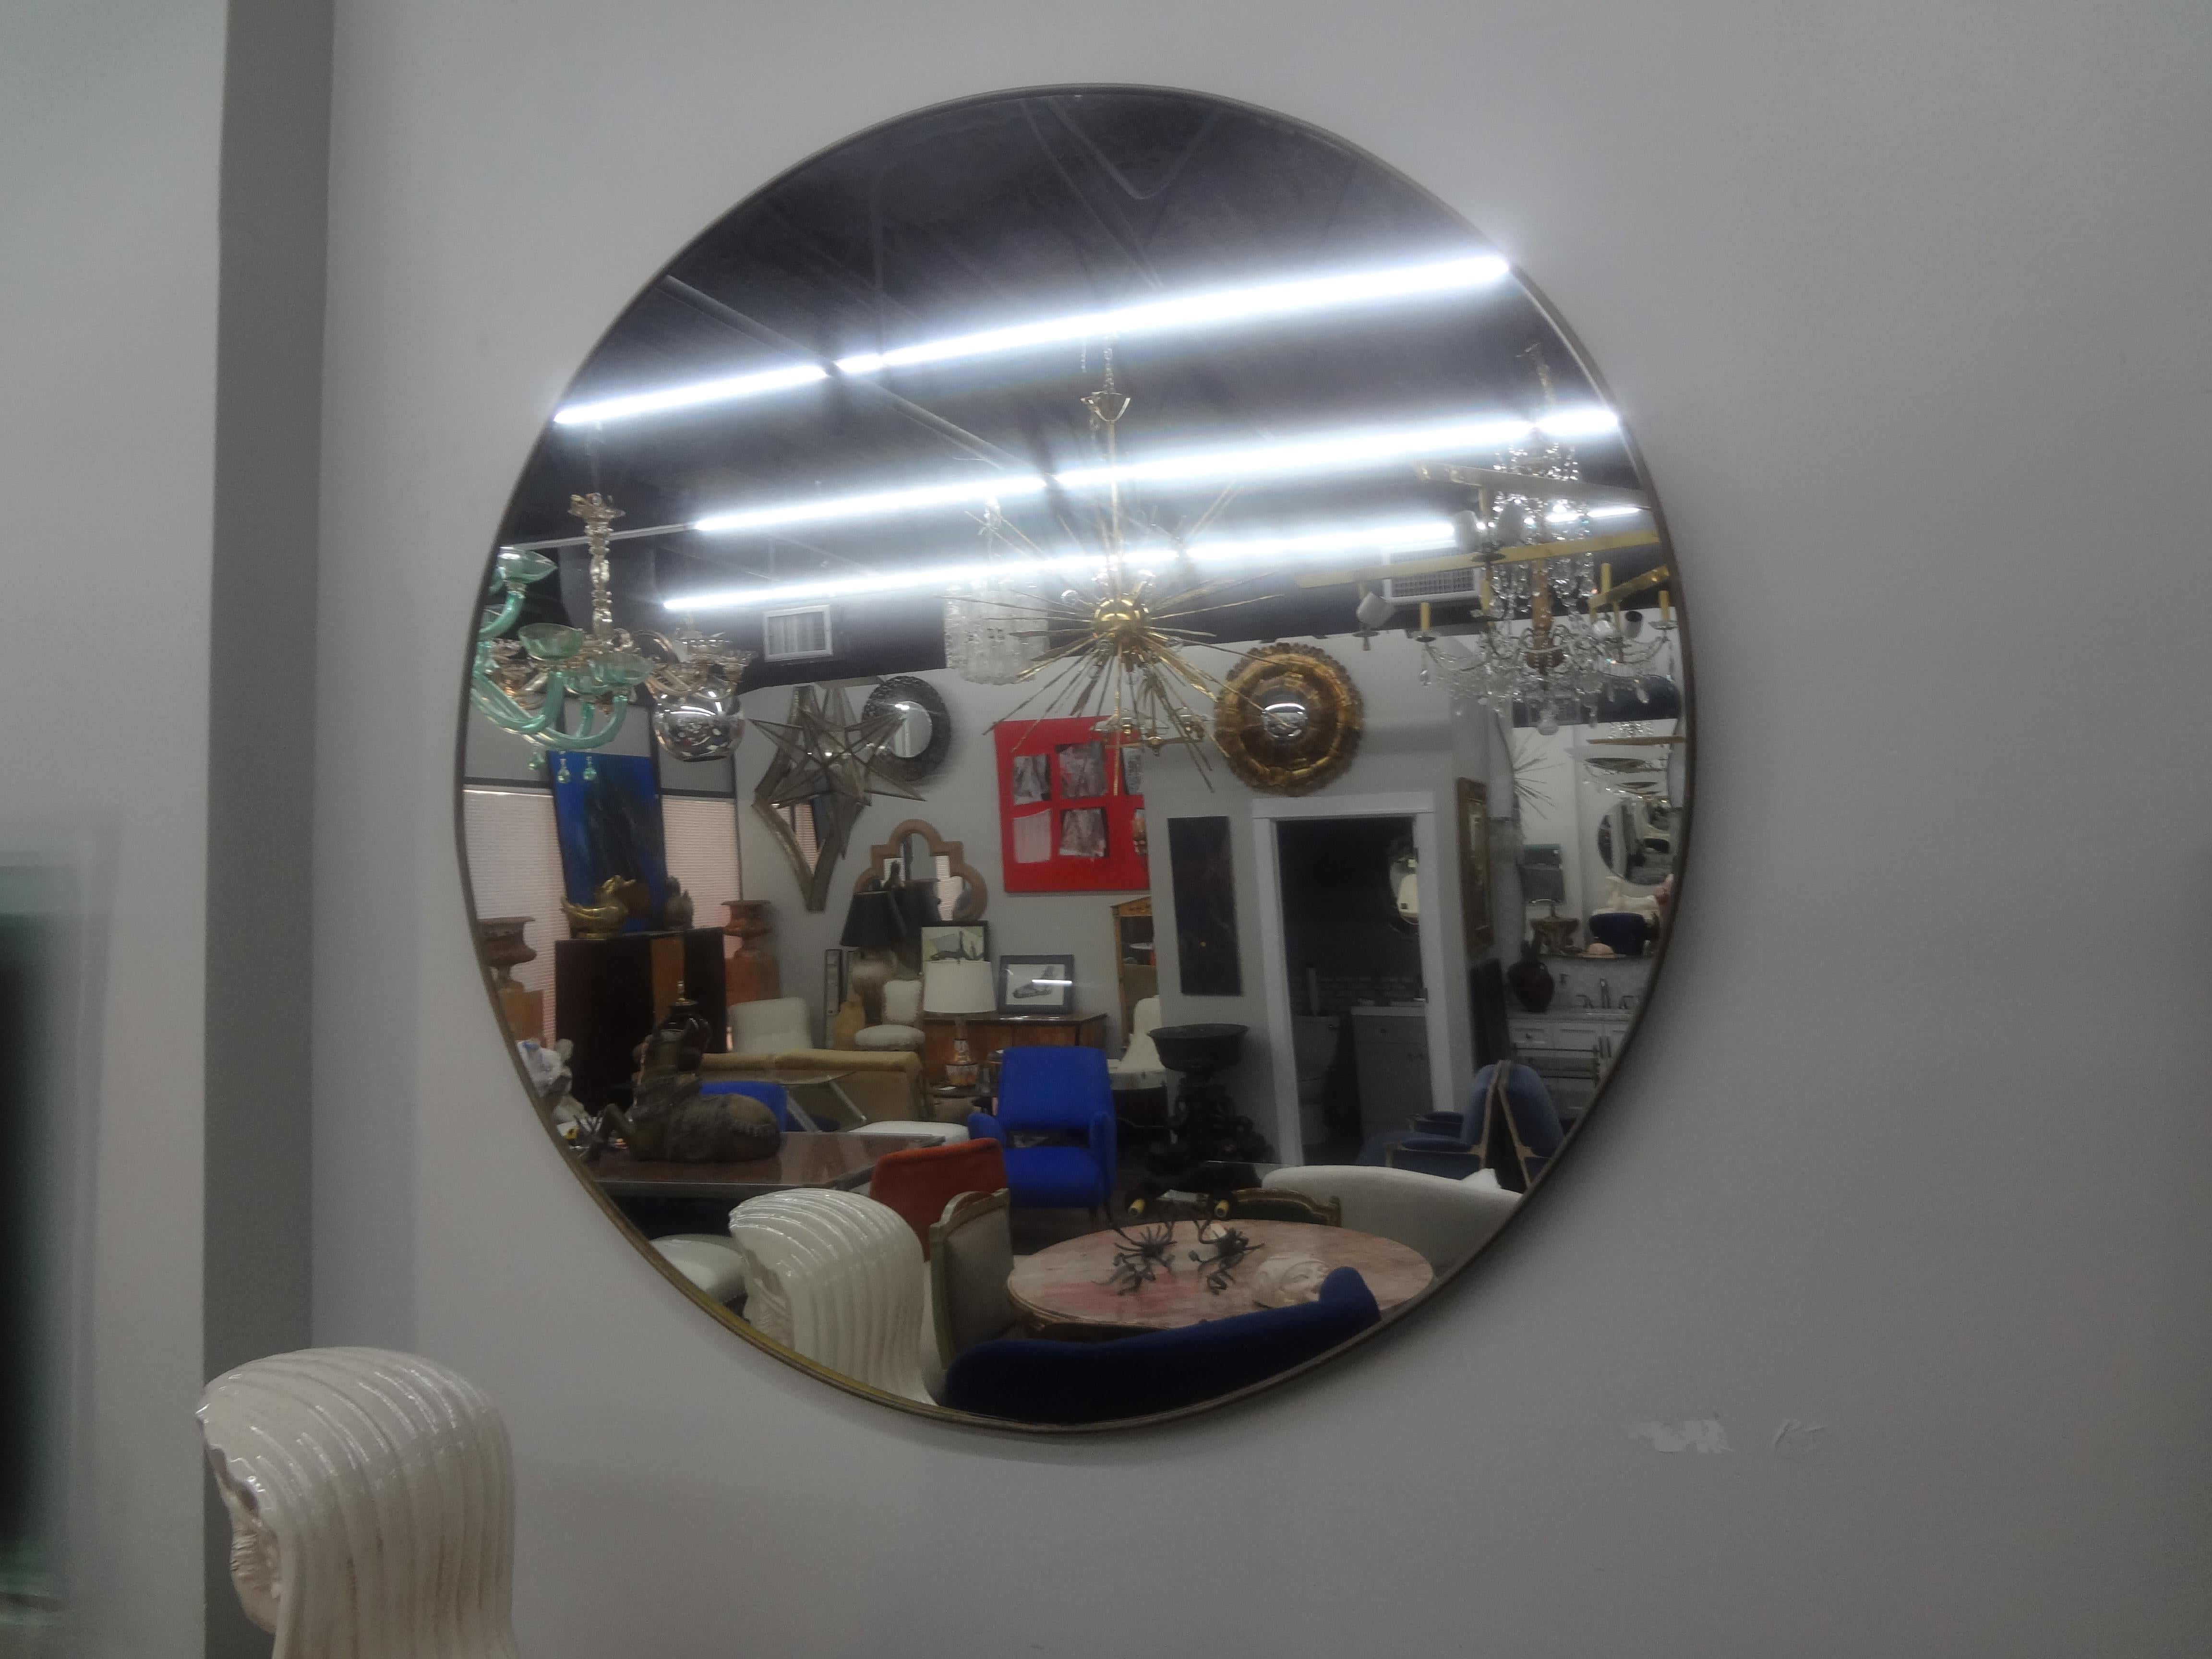 Pair Of Italian Brass Mirrors.
Matching pair of Italian modernist Gio Ponti inspired brass or bronze mirrors have gorgeous patina and date to the 1960s. Our stunning Hollywood Regency round brass mirrors would look great over console tables,